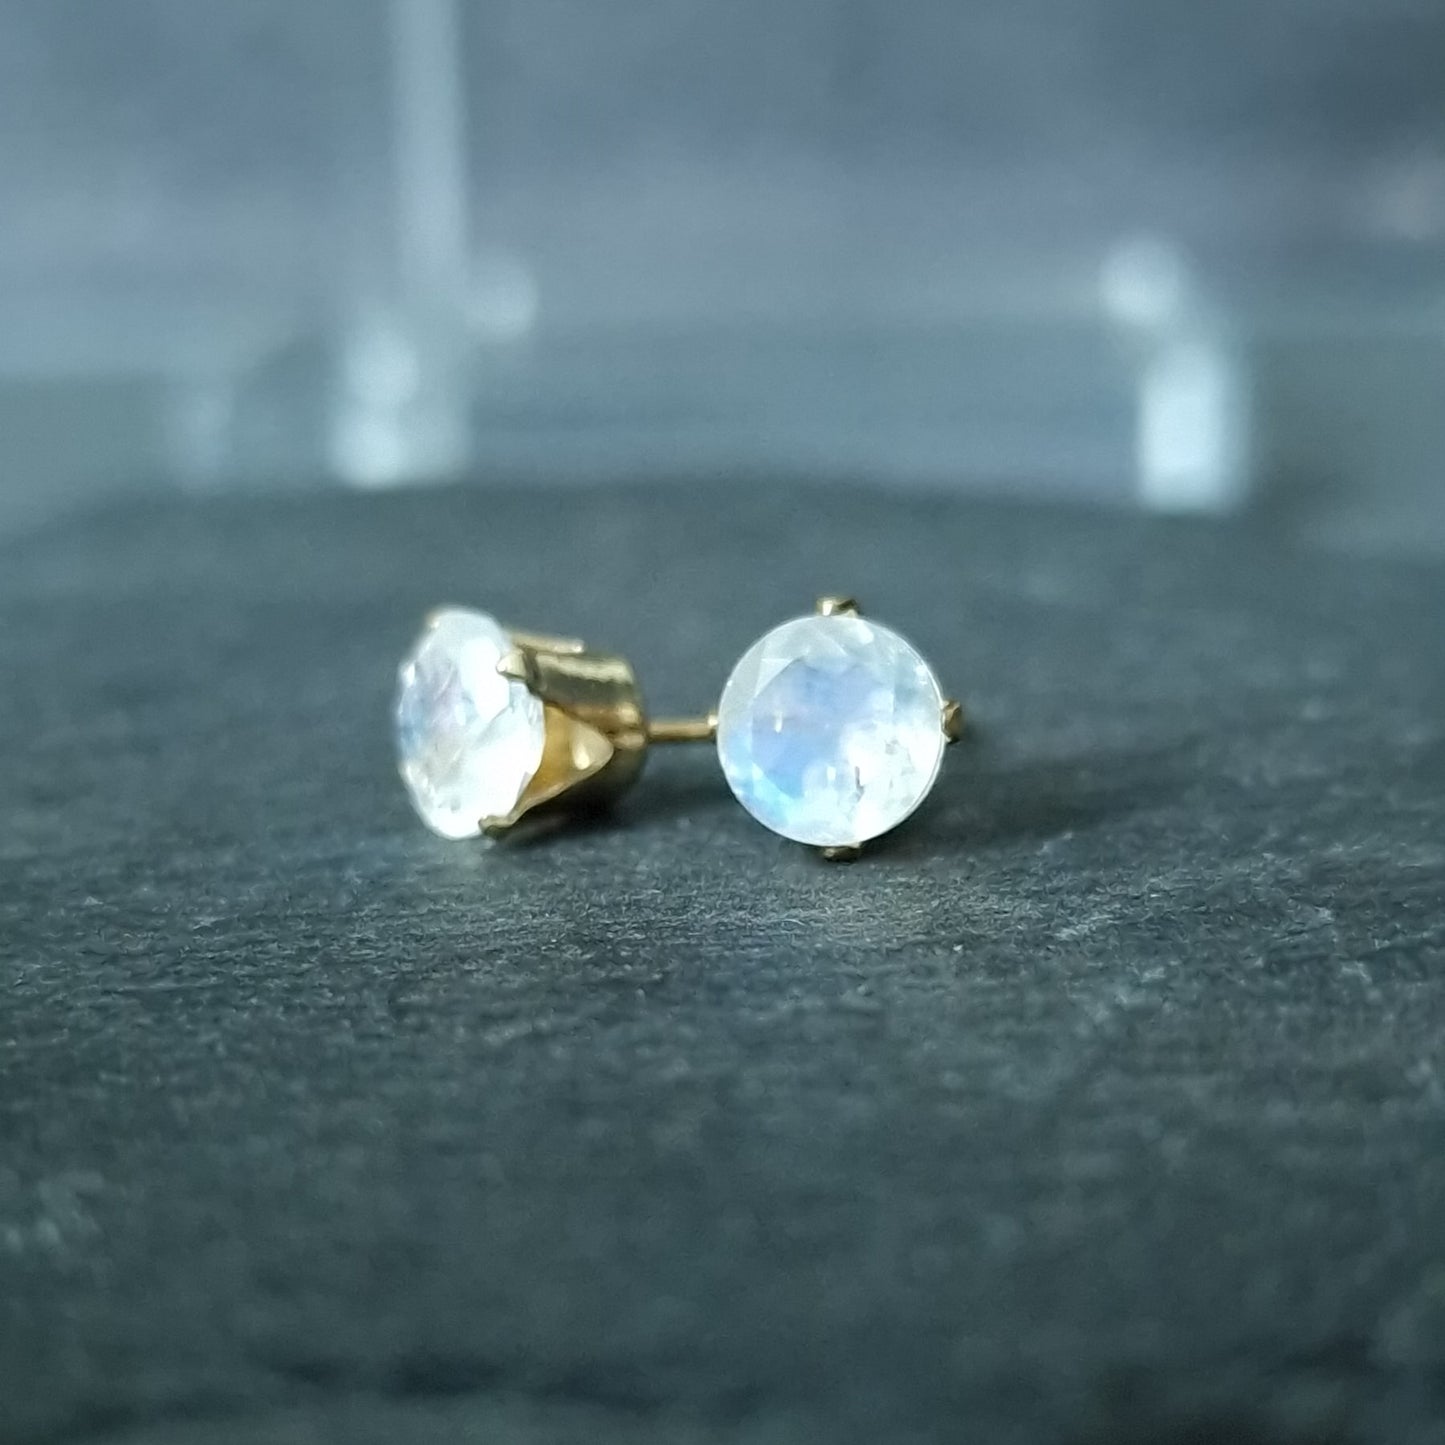 Moonstone stud earrings in gold filled or sterling silver